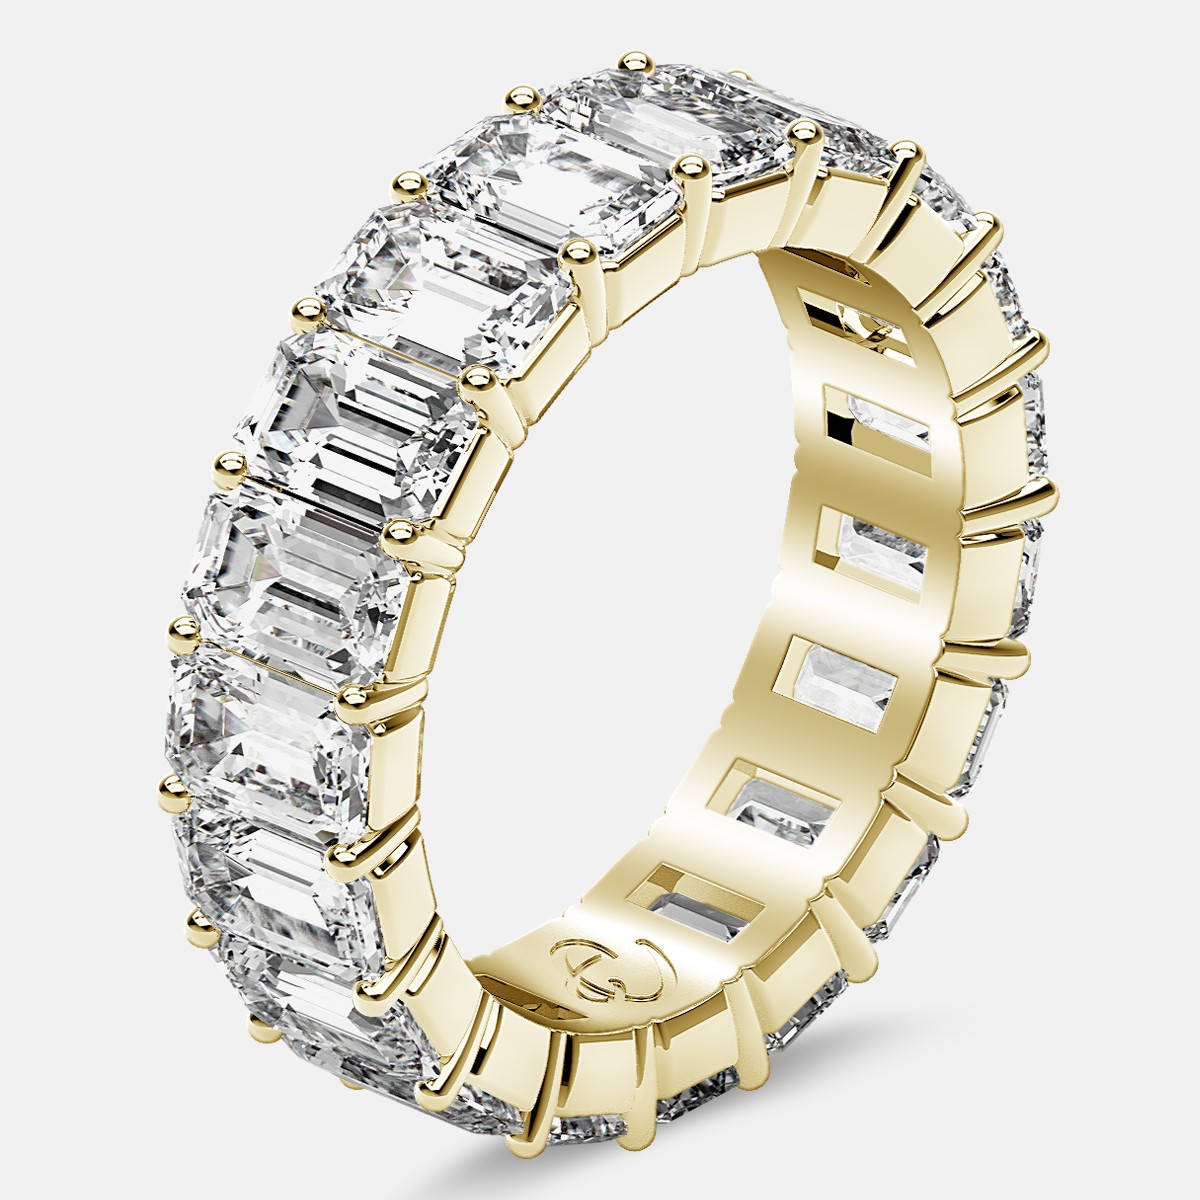 Classic Eternity Ring with Emerald Cut Diamonds in 18k Yellow Gold